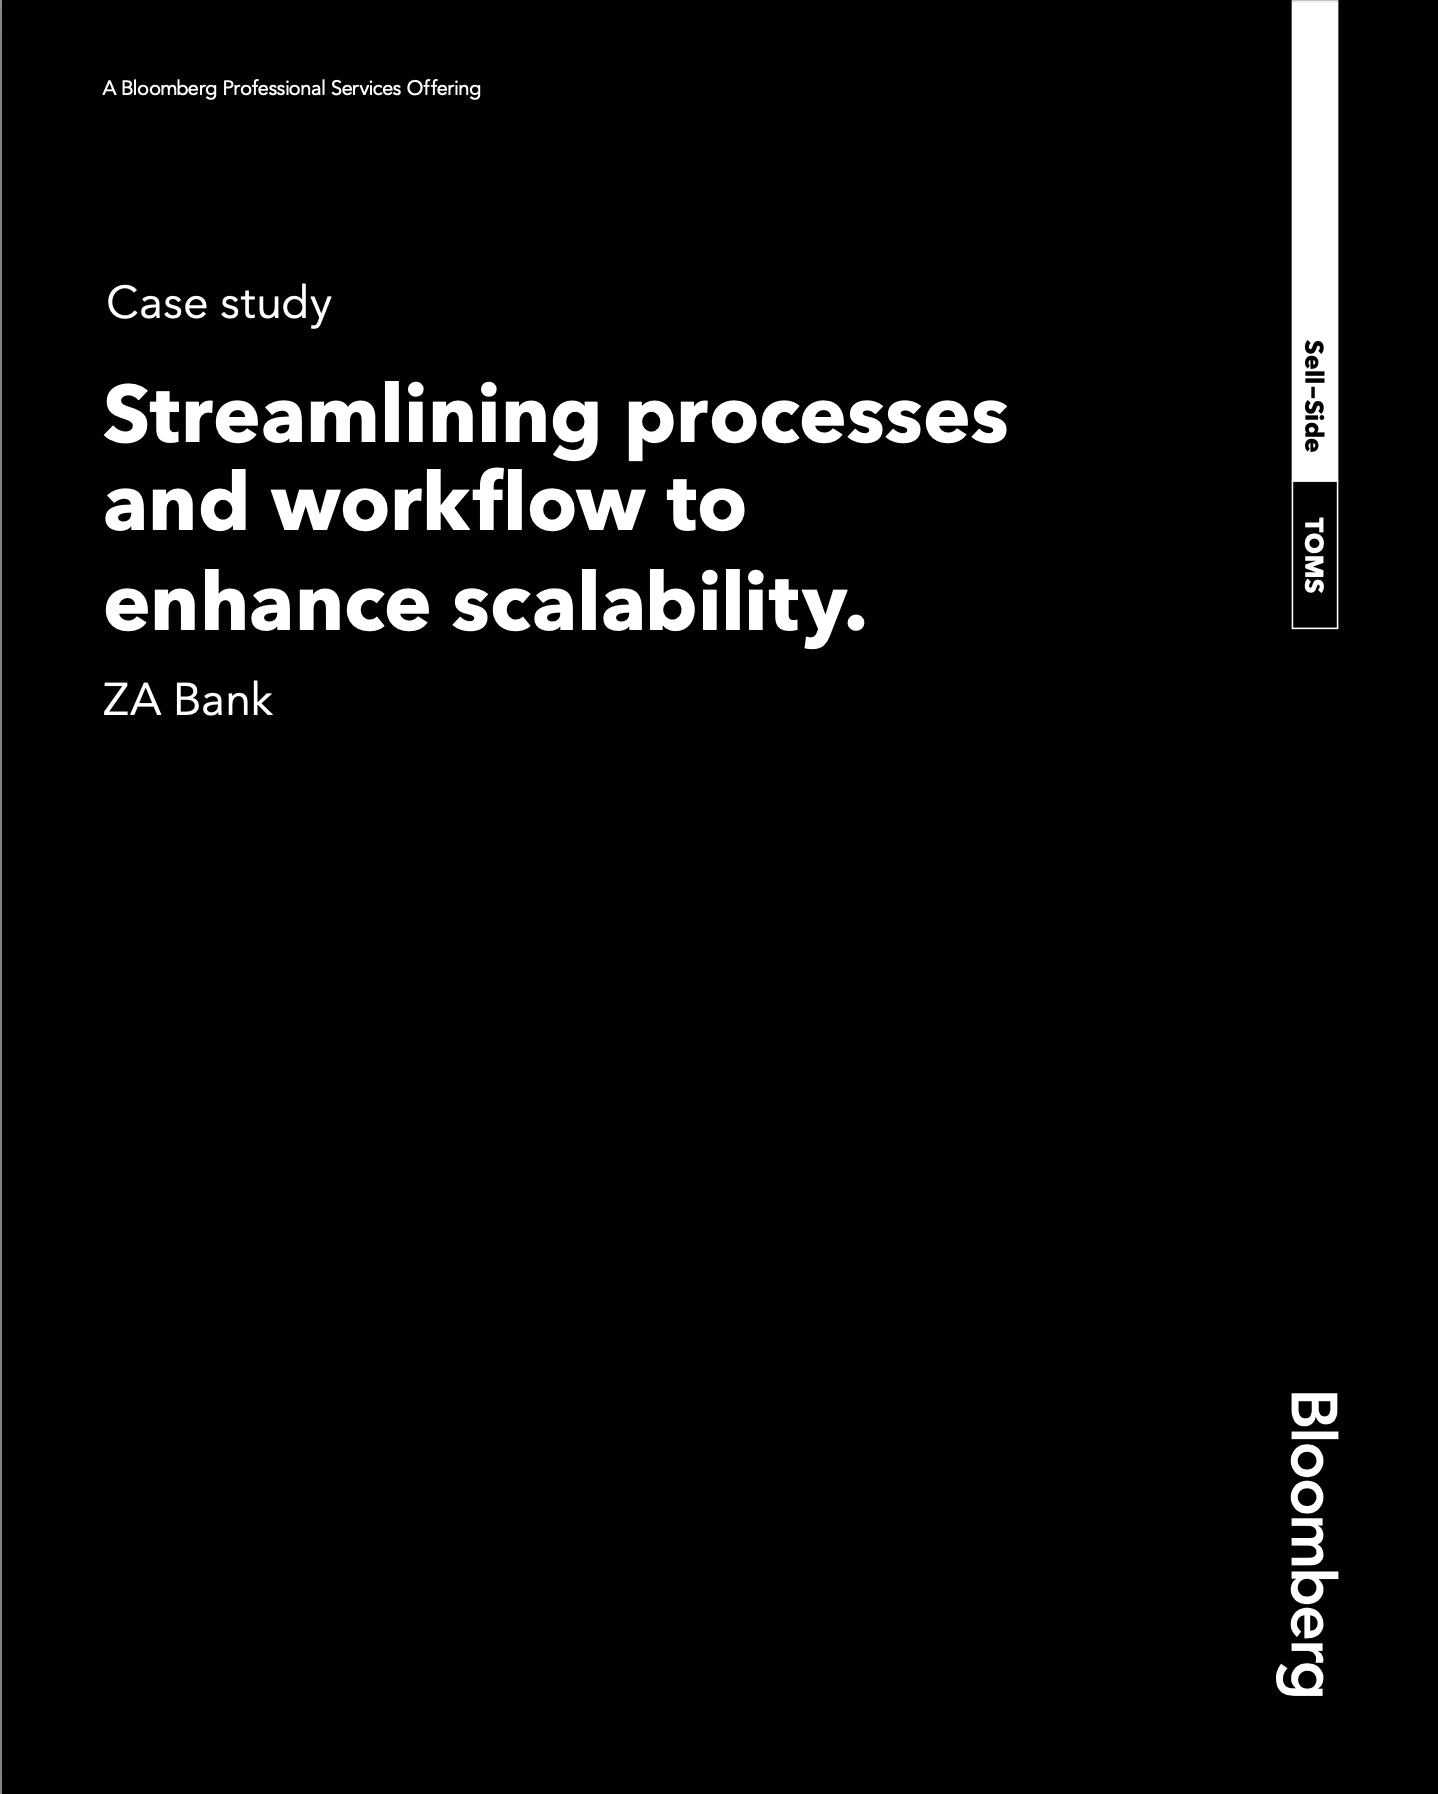 Streamlining processes and workflow to enhance scalability